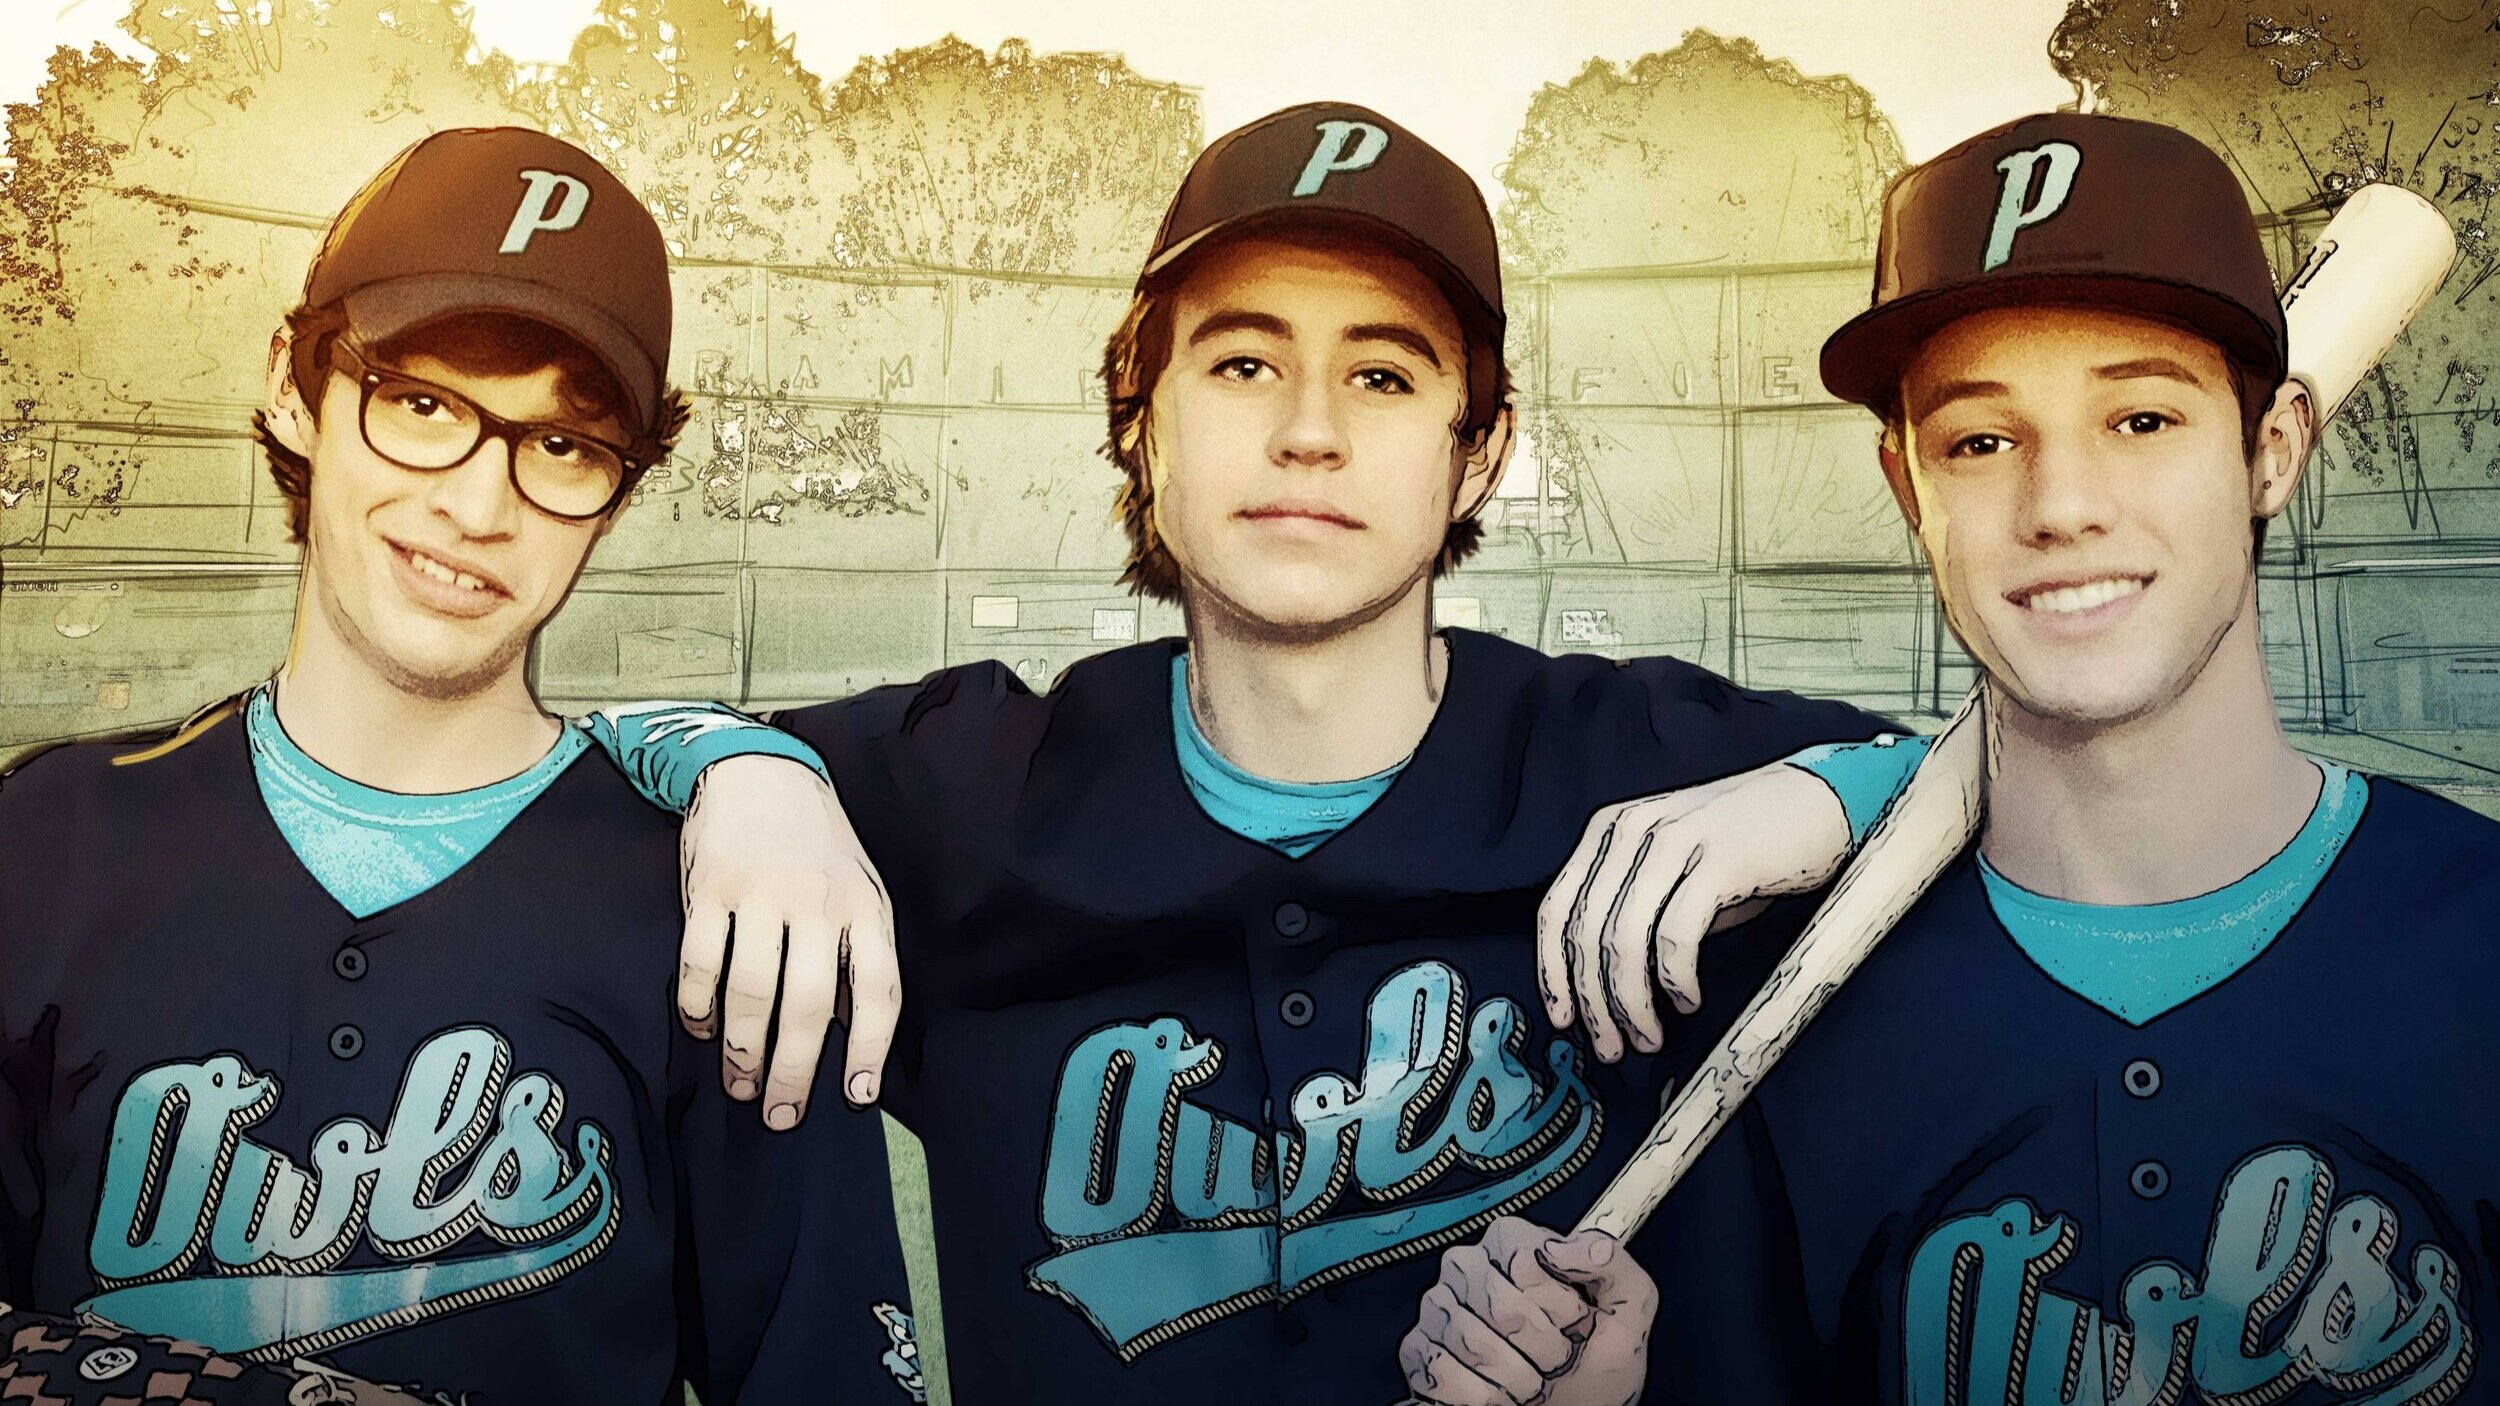 The outfield. Группа the Outfield. THW Outfield. Thrash Outfield.